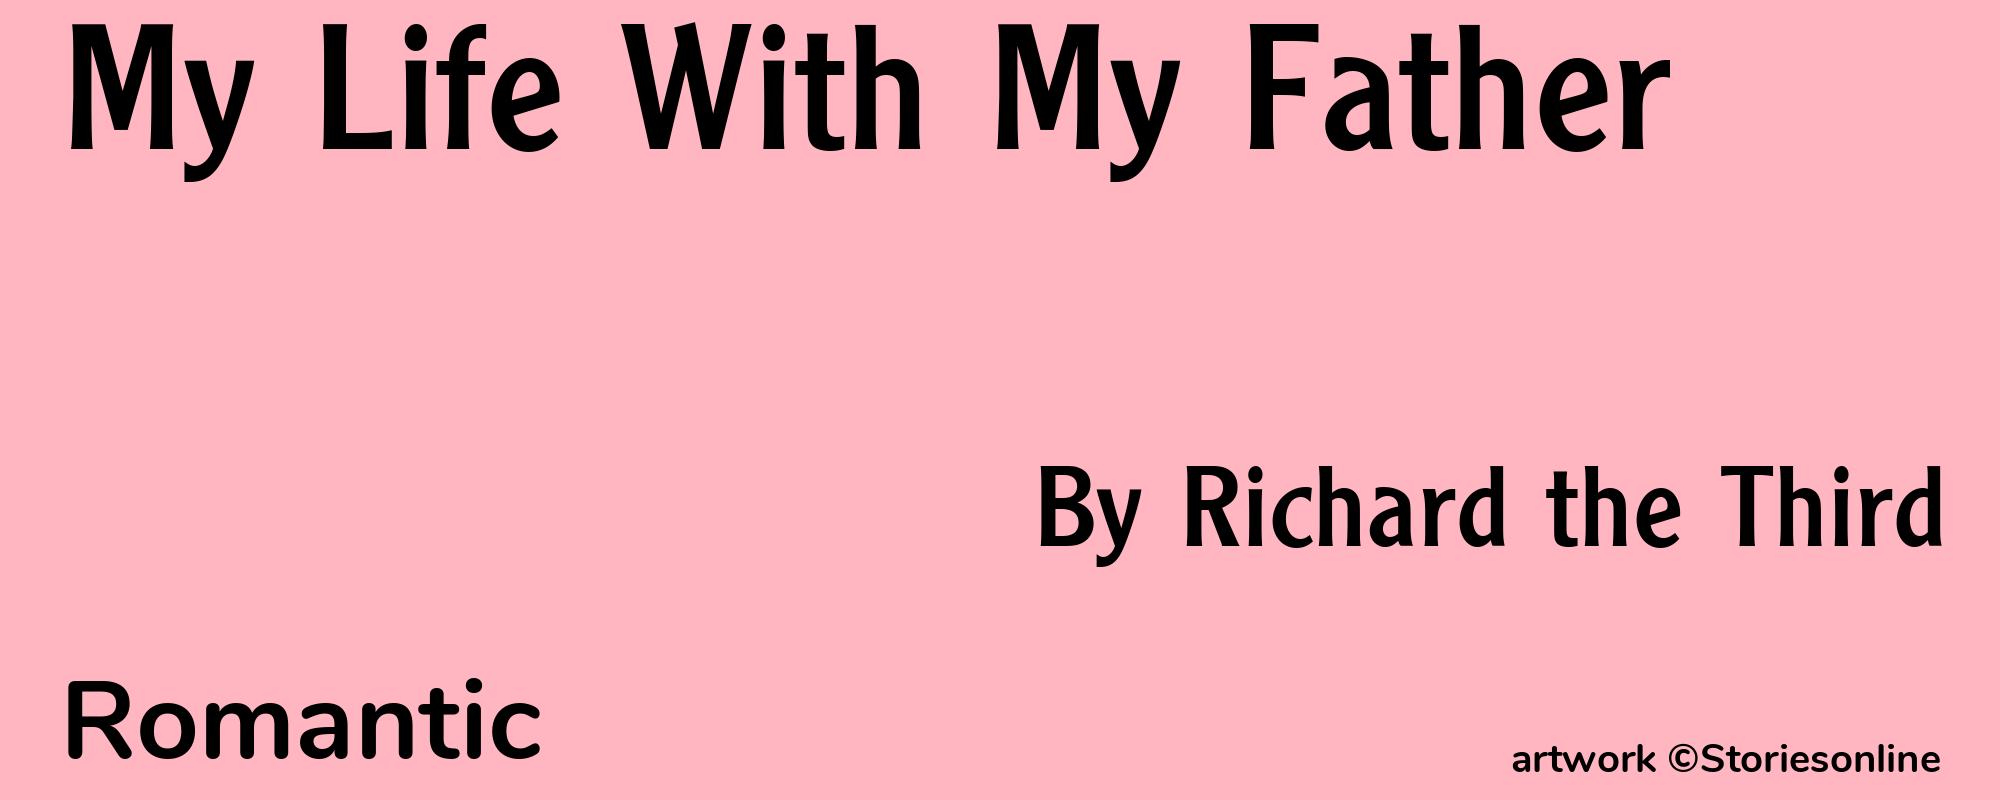 My Life With My Father - Cover